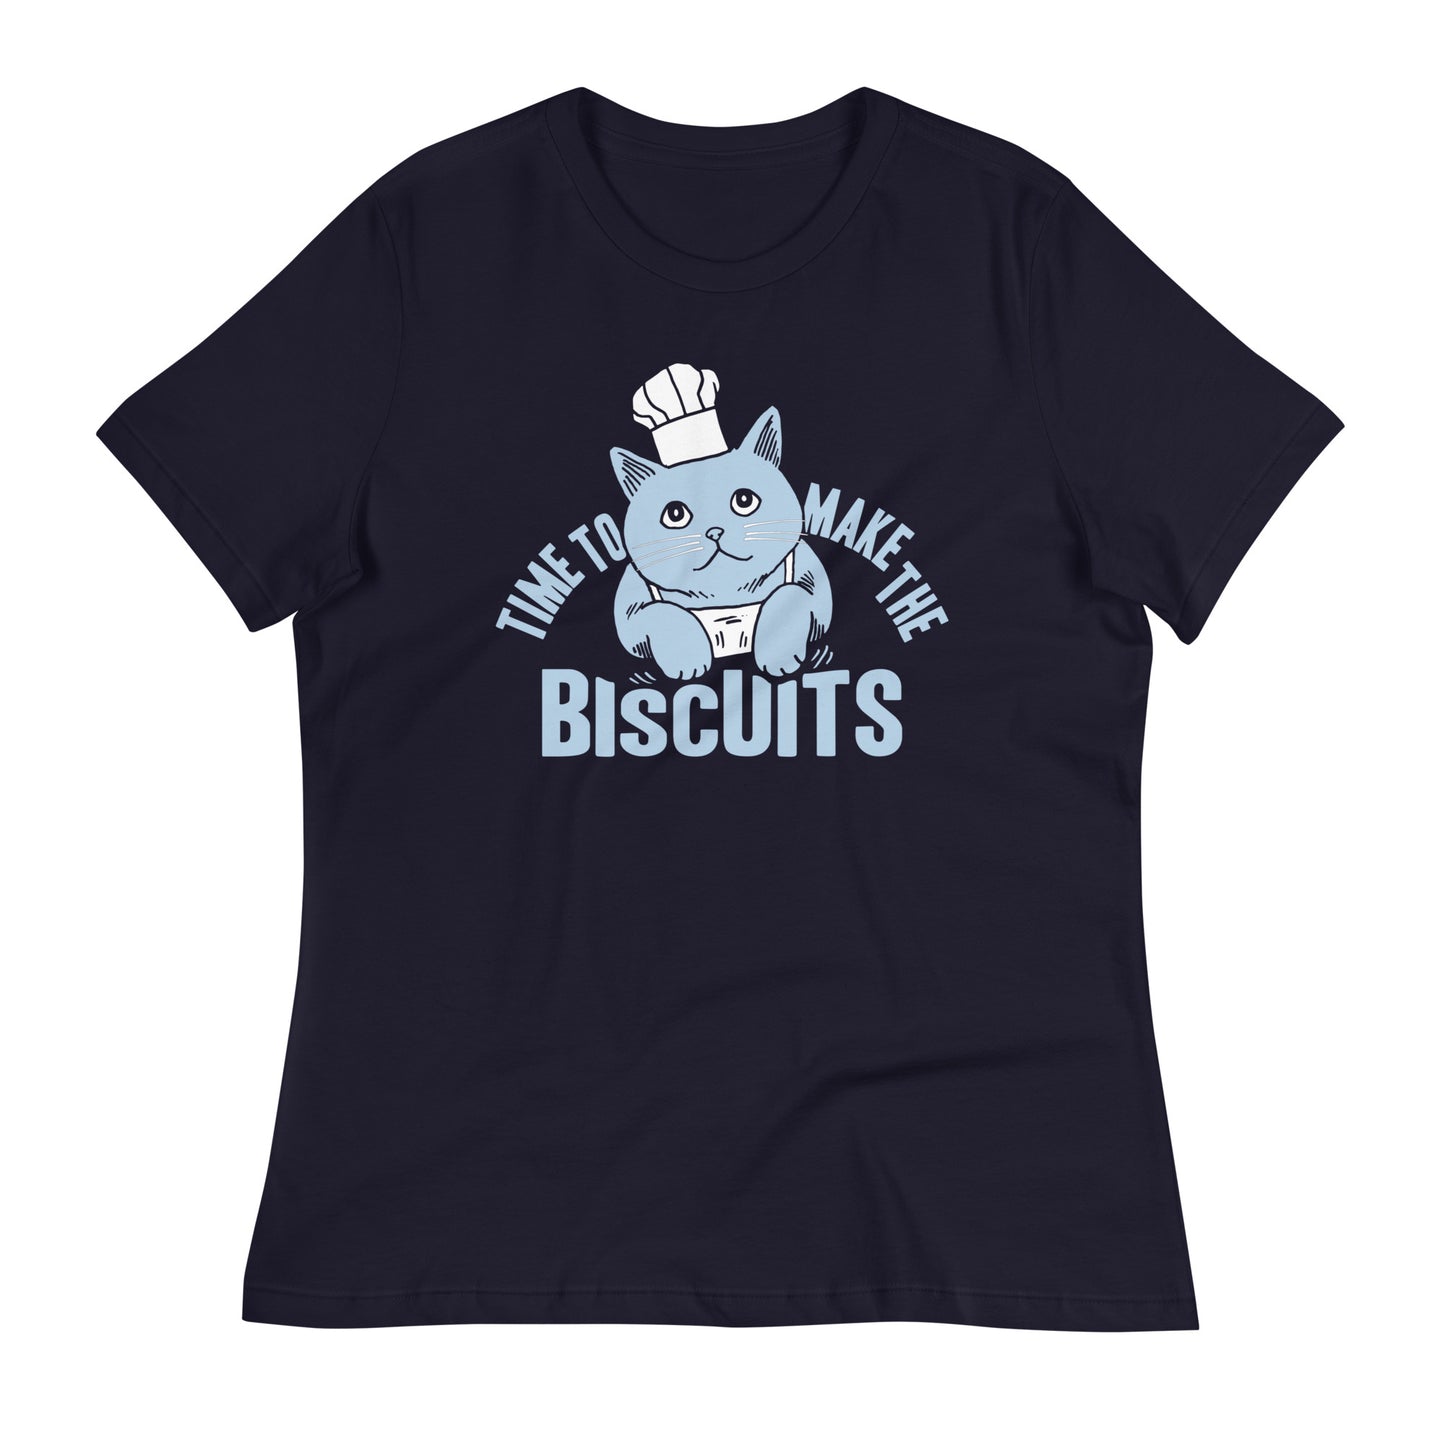 Time To Make The Biscuits Women's Signature Tee